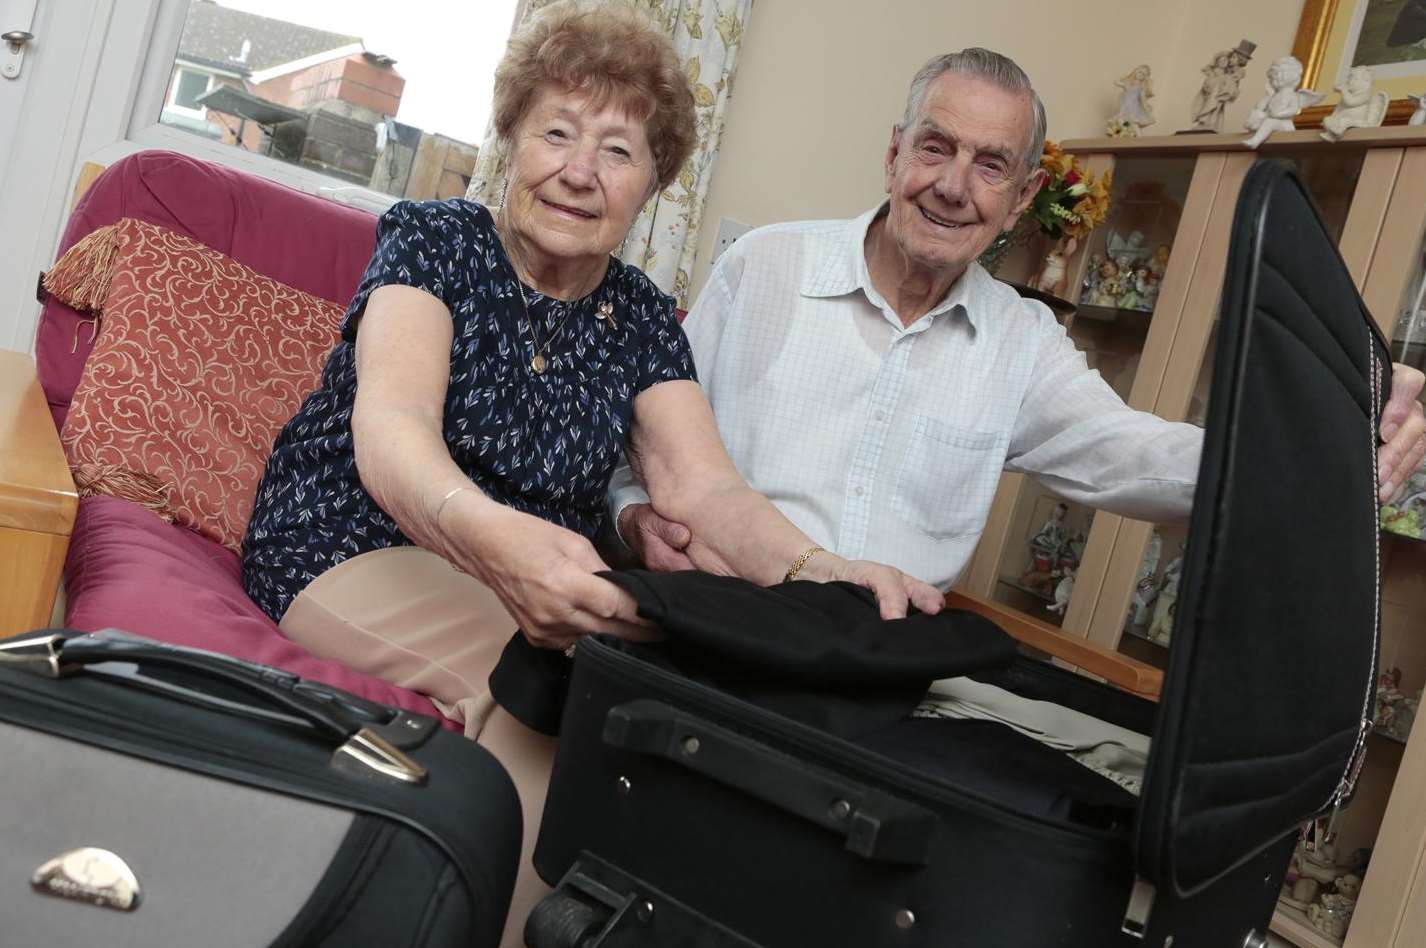 Madge and Charlie Pallett, both in their 90s, packing for their first holiday flight abroad together